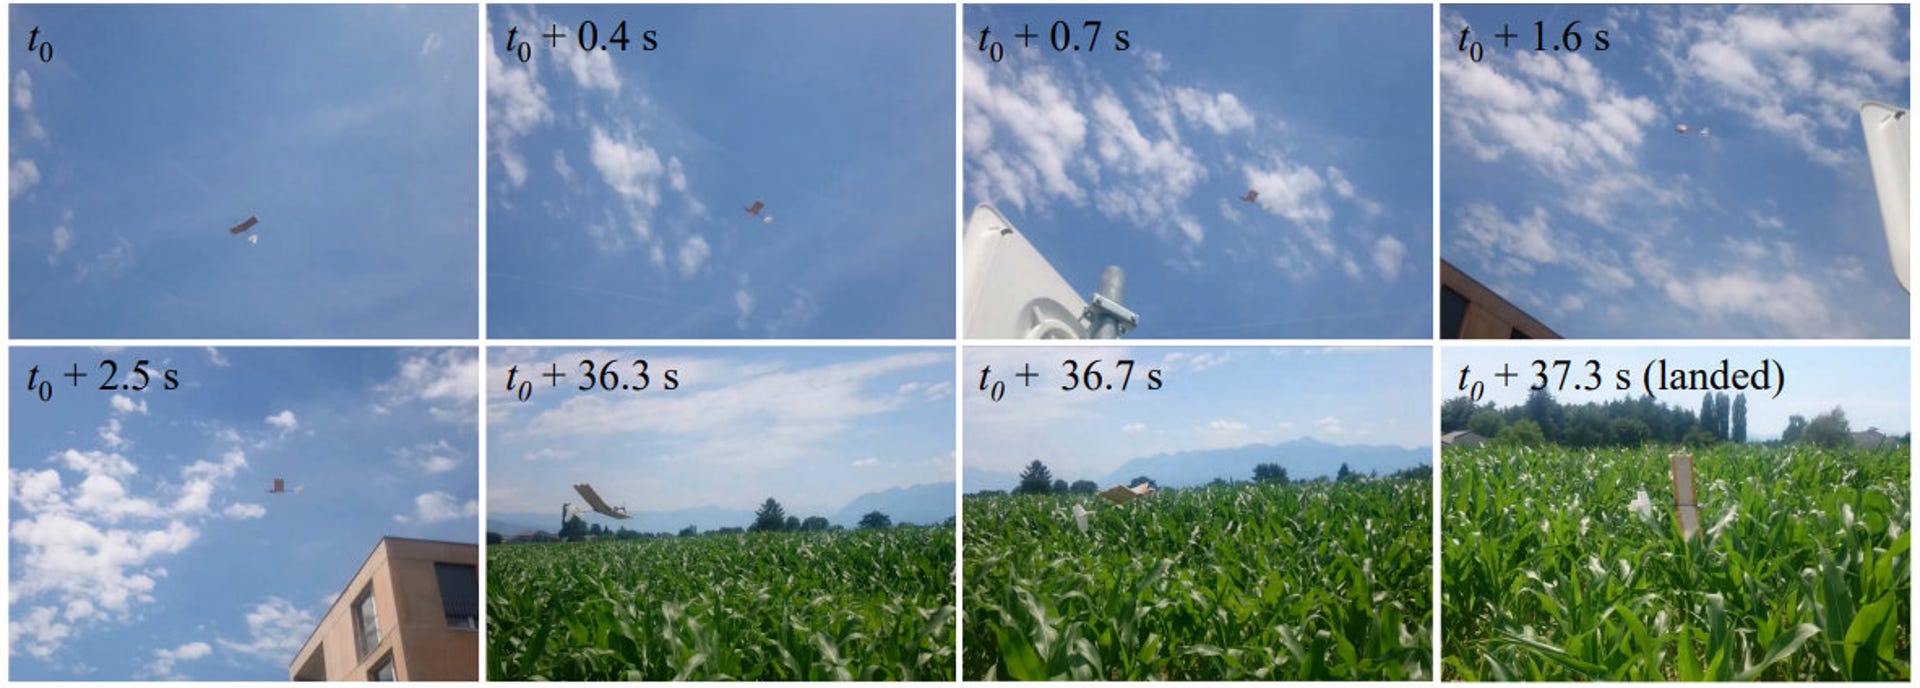 Multiple screenshots show the flight of an edible drone against a blue sky and then landing in a field.